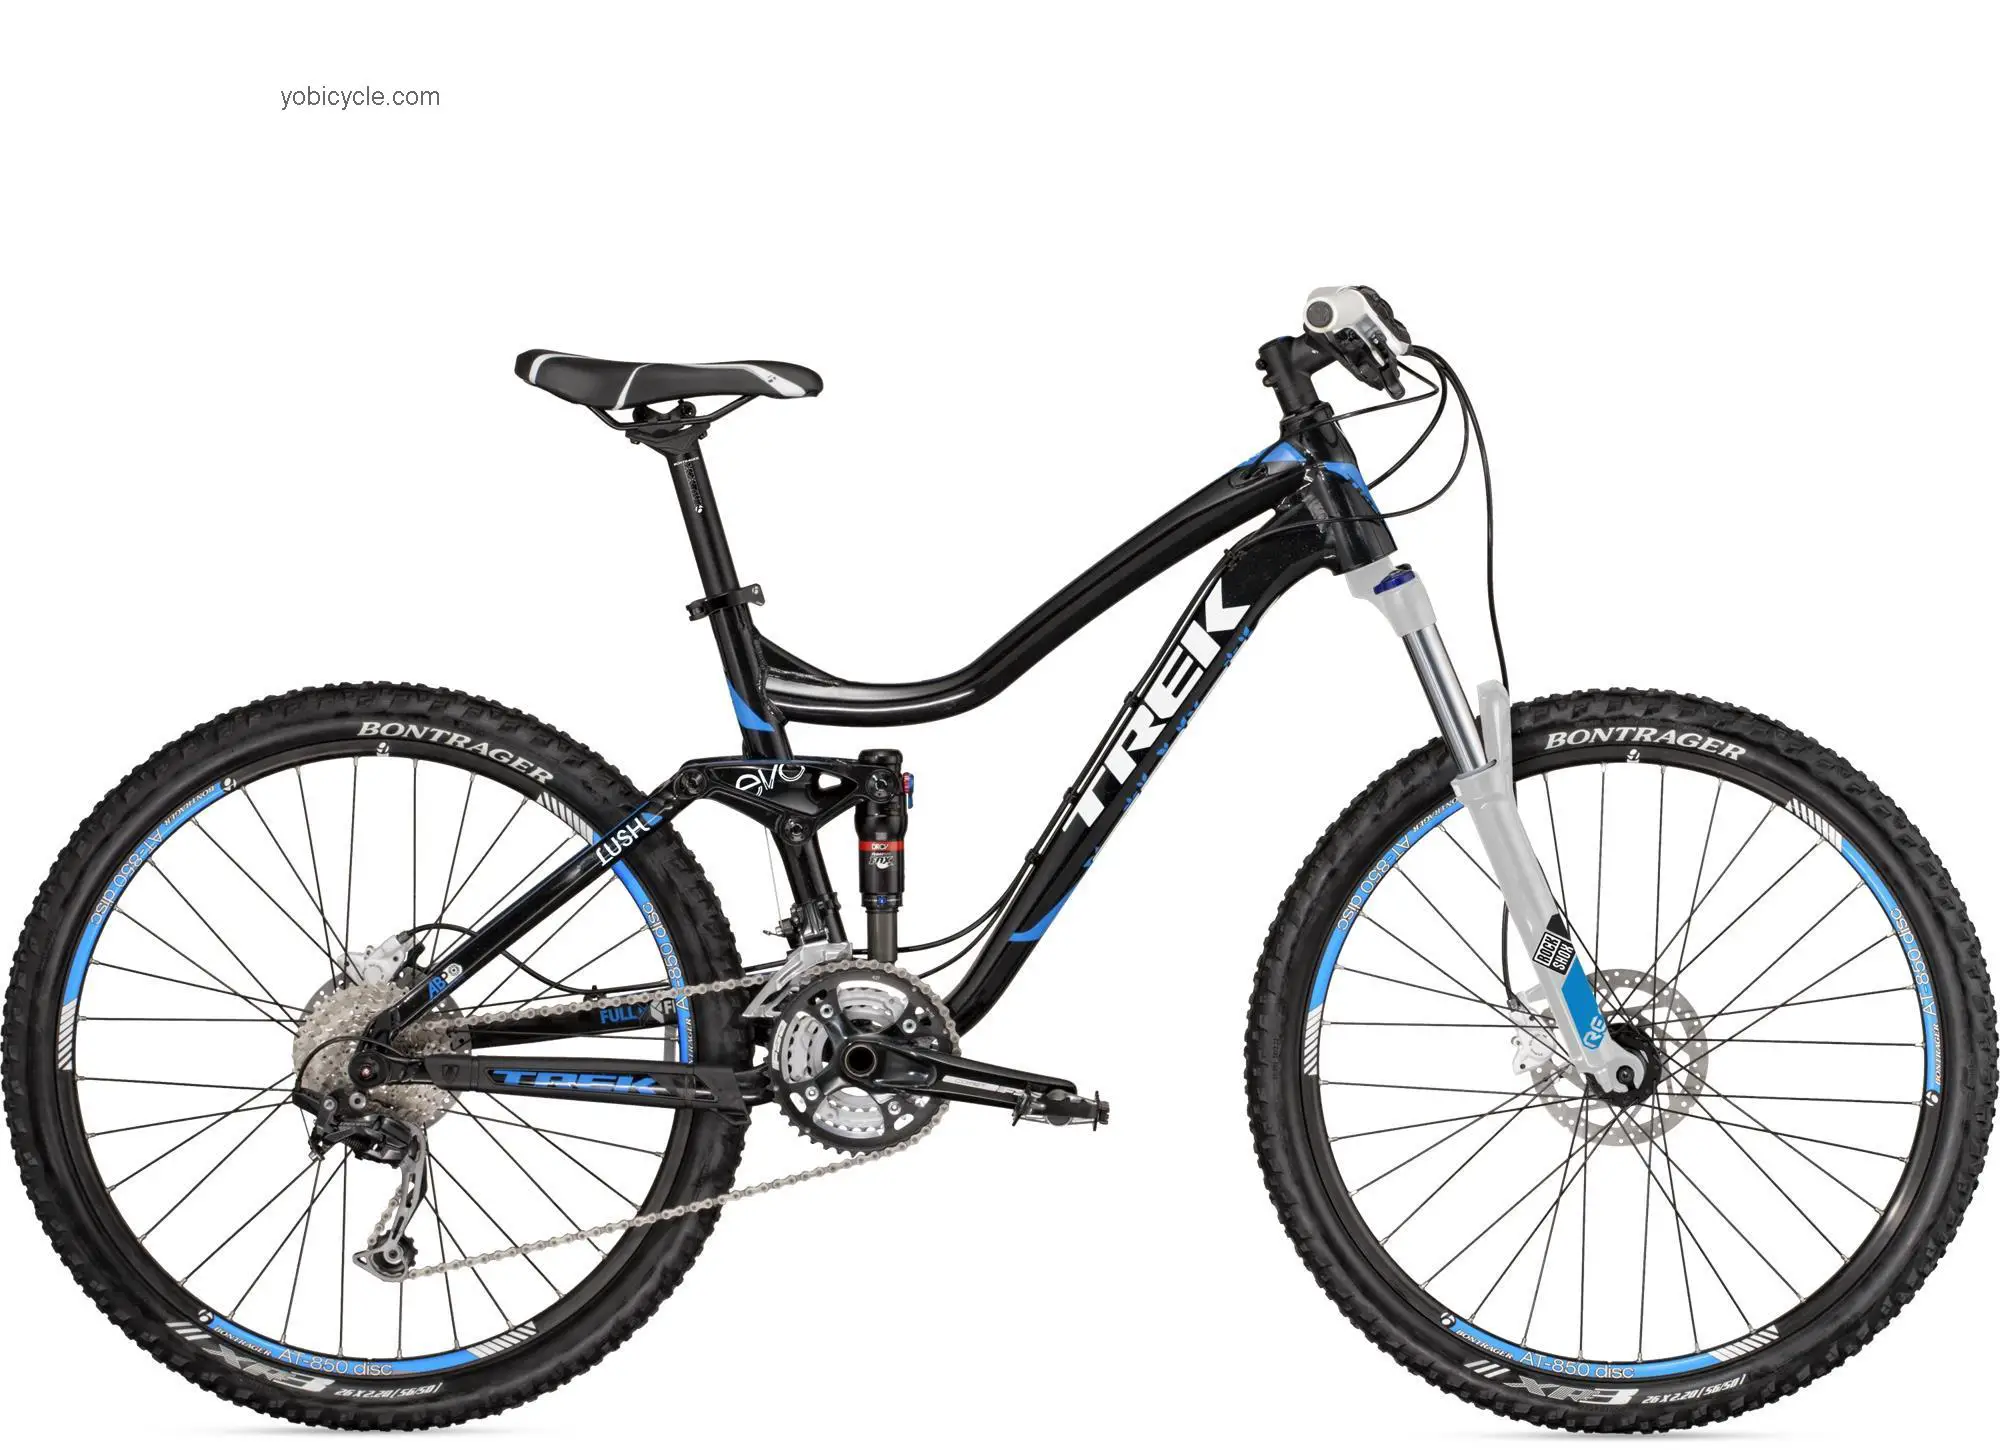 Trek Lush competitors and comparison tool online specs and performance